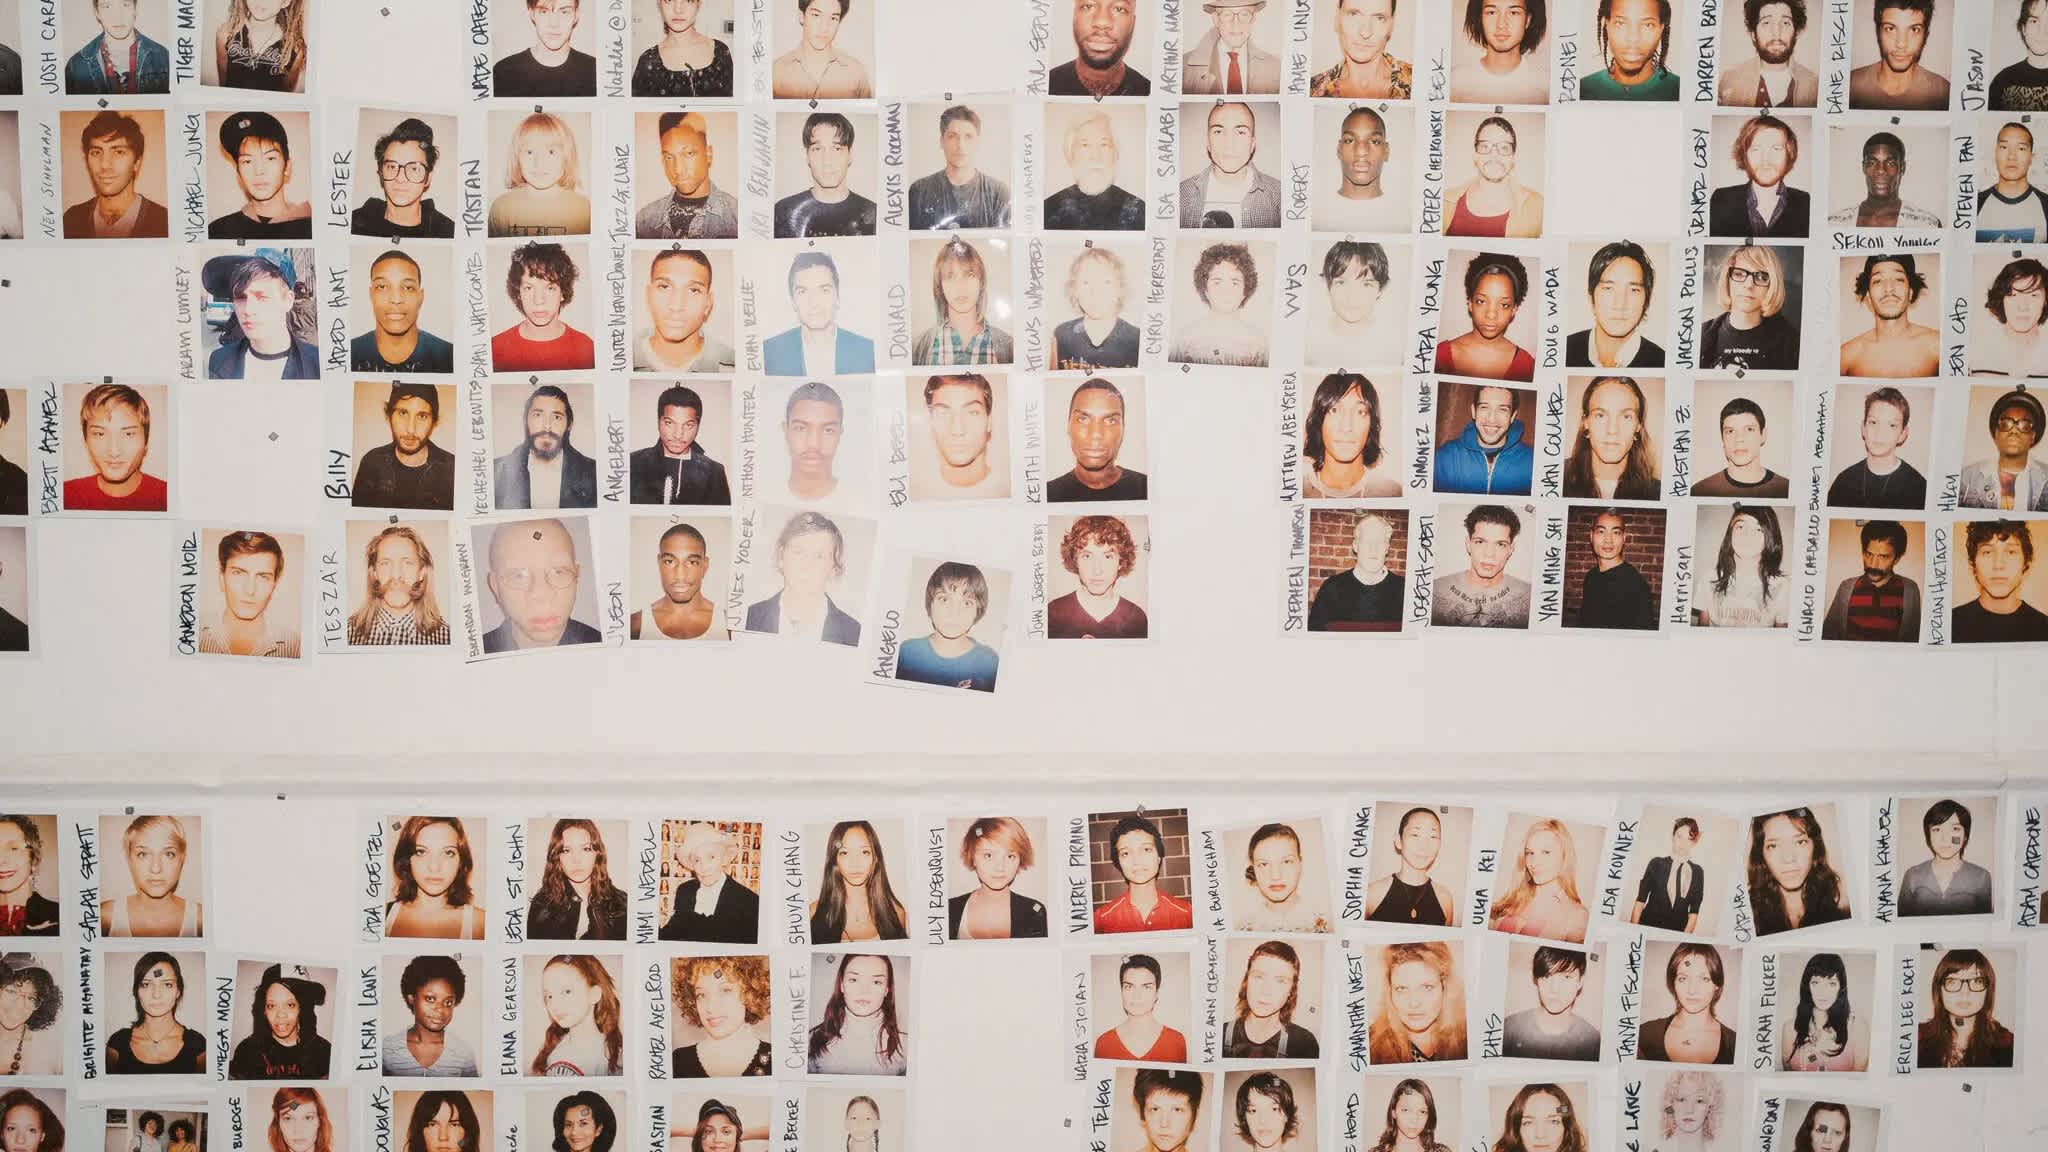 Photograph of a casting wall. The wall is covered in various polaroids of people from the chest up. There is an overall warm cast to the image.